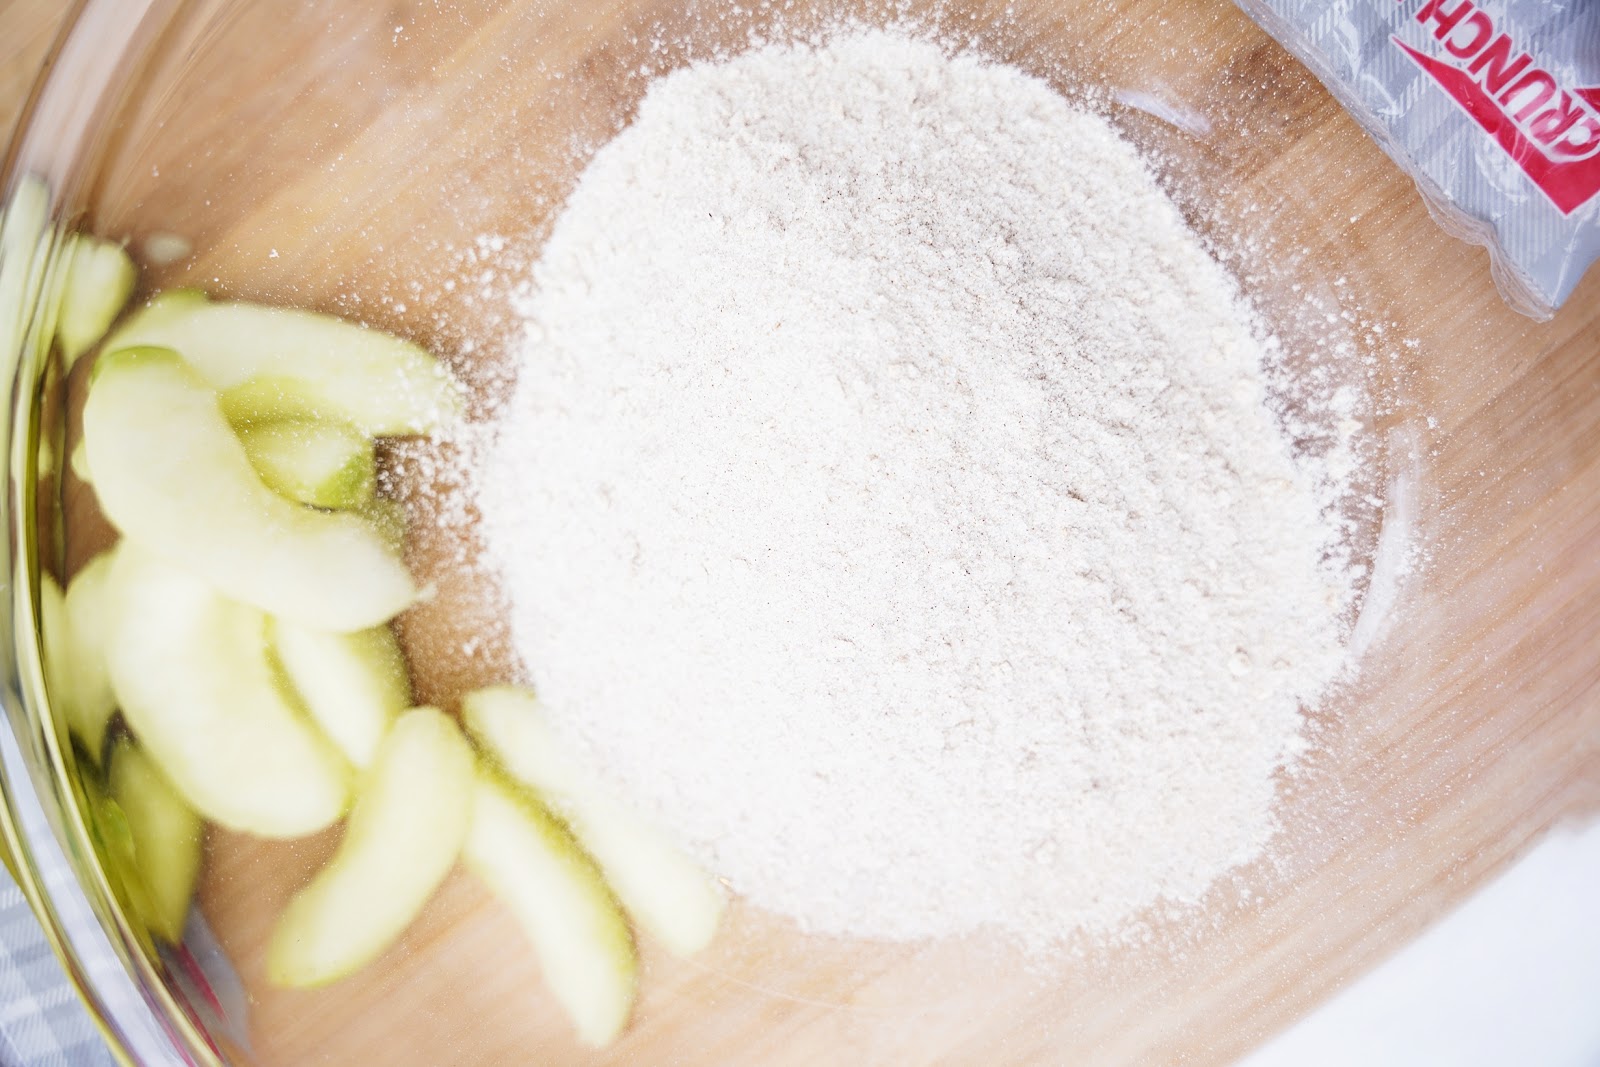 The baking kit includes fresh apples and dry ingredients.